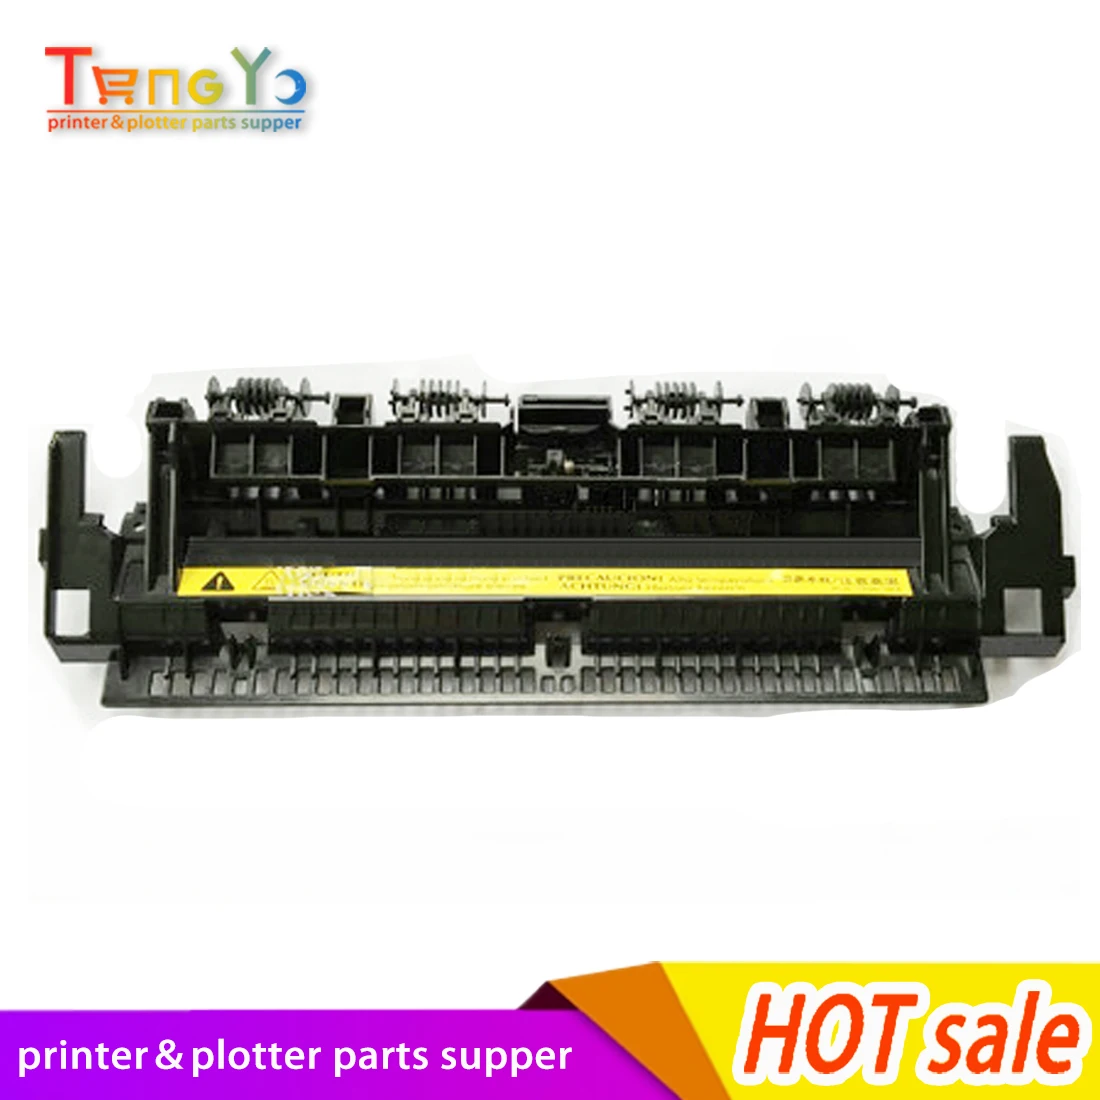 

Imoprt New For HP M1536 P1606 P1566 M201 M202 M225 M226 MF4752 4770 4720 4880 4830 4870 4410 Fuser Assembly Cover RC2-9482-000